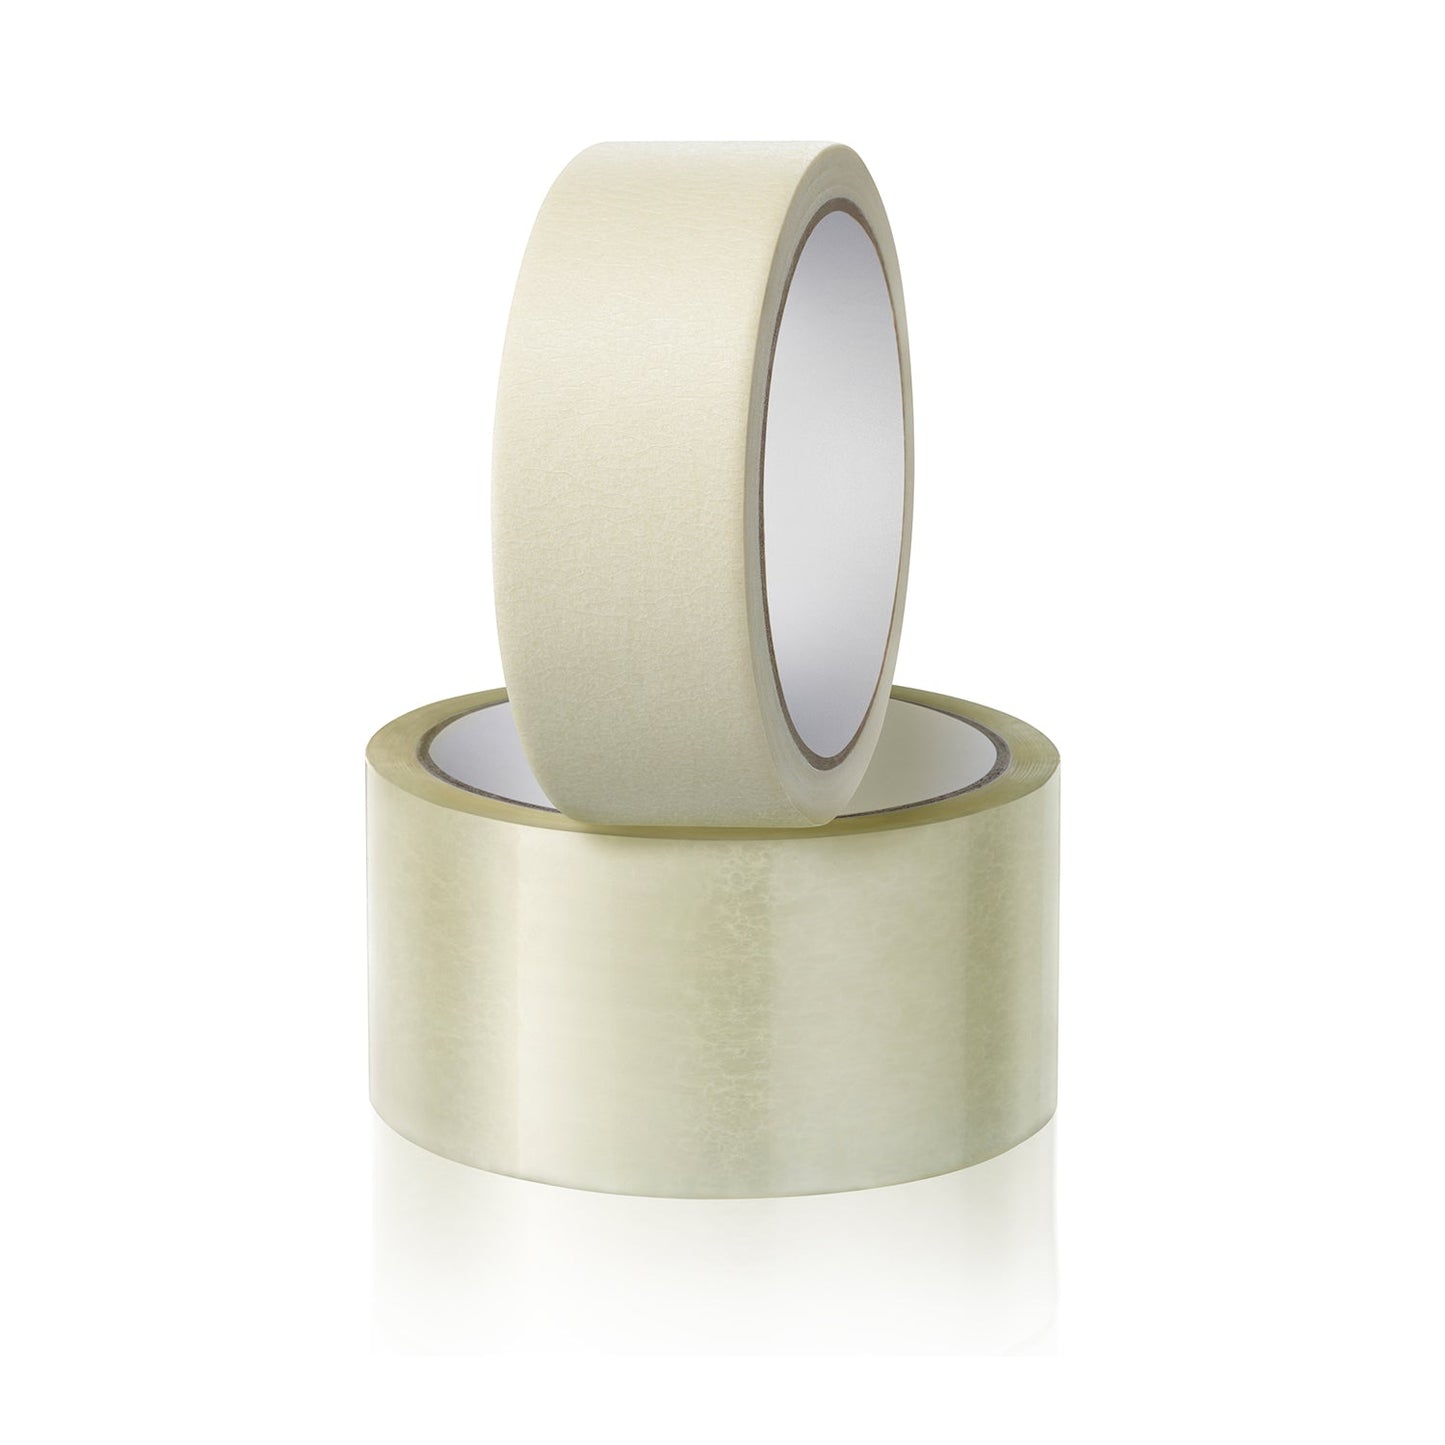 HIGH ADHESIVE TRANSPARENT TAPE FOR HOME PACKAGING. (120 meter)